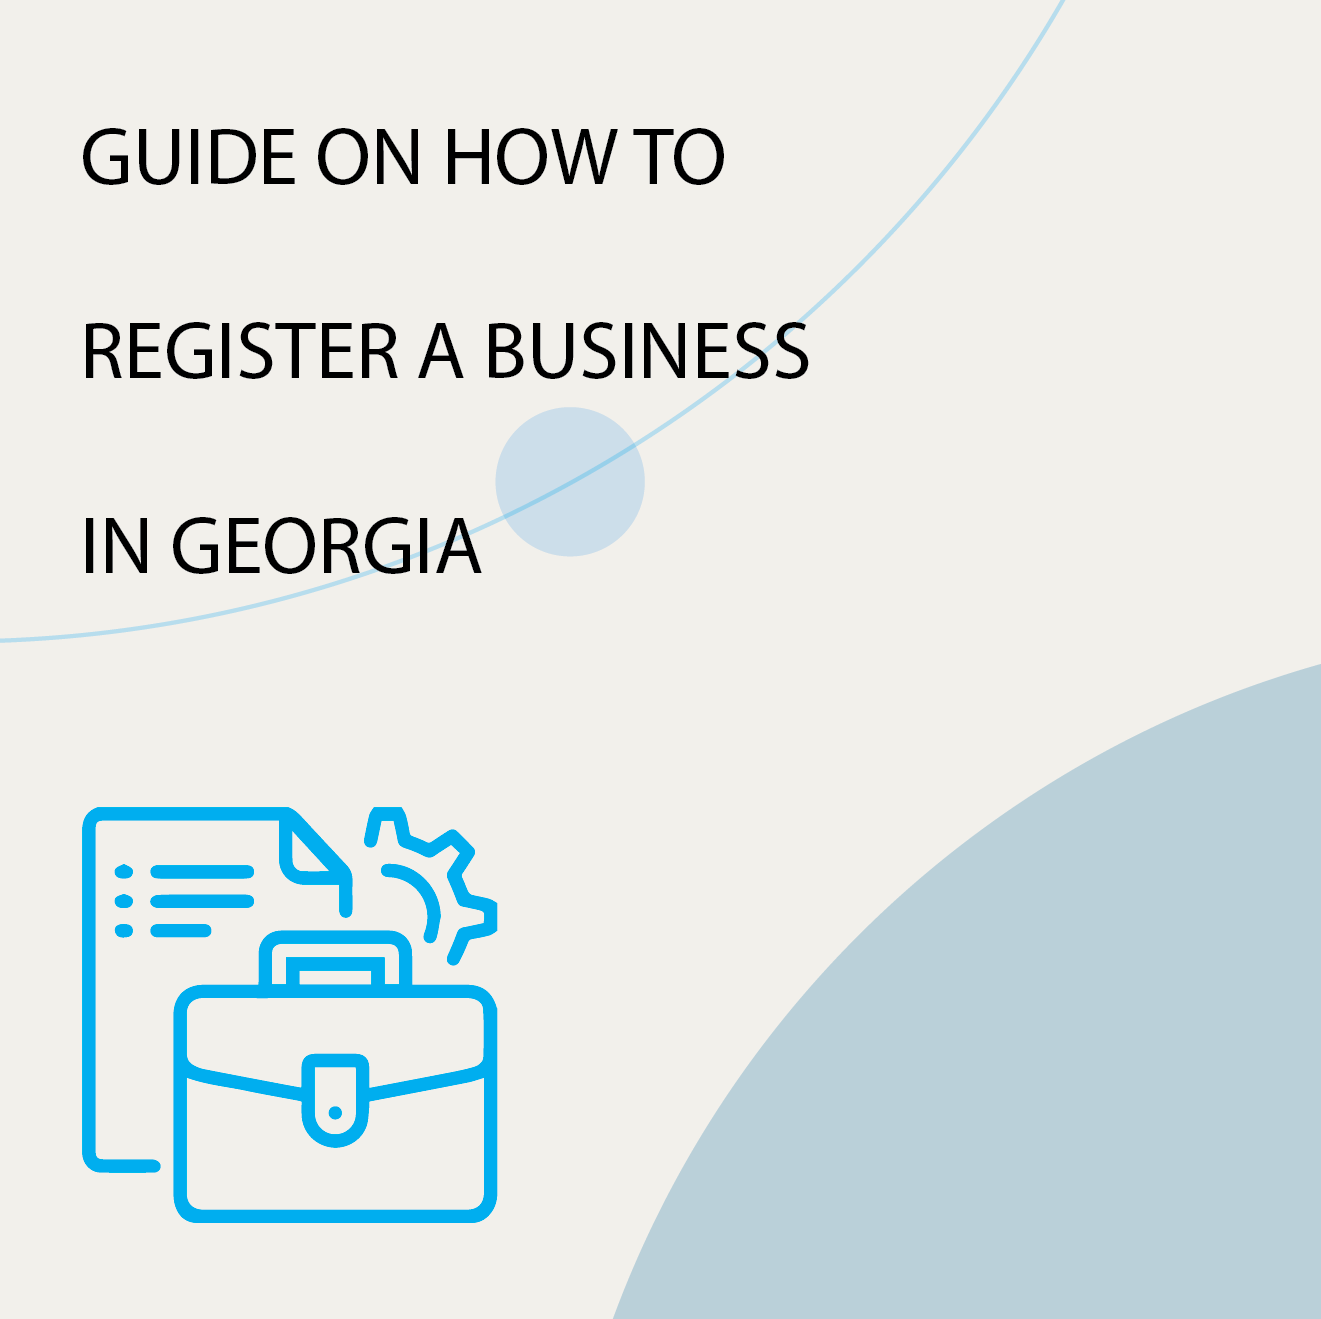 How to Register a Business